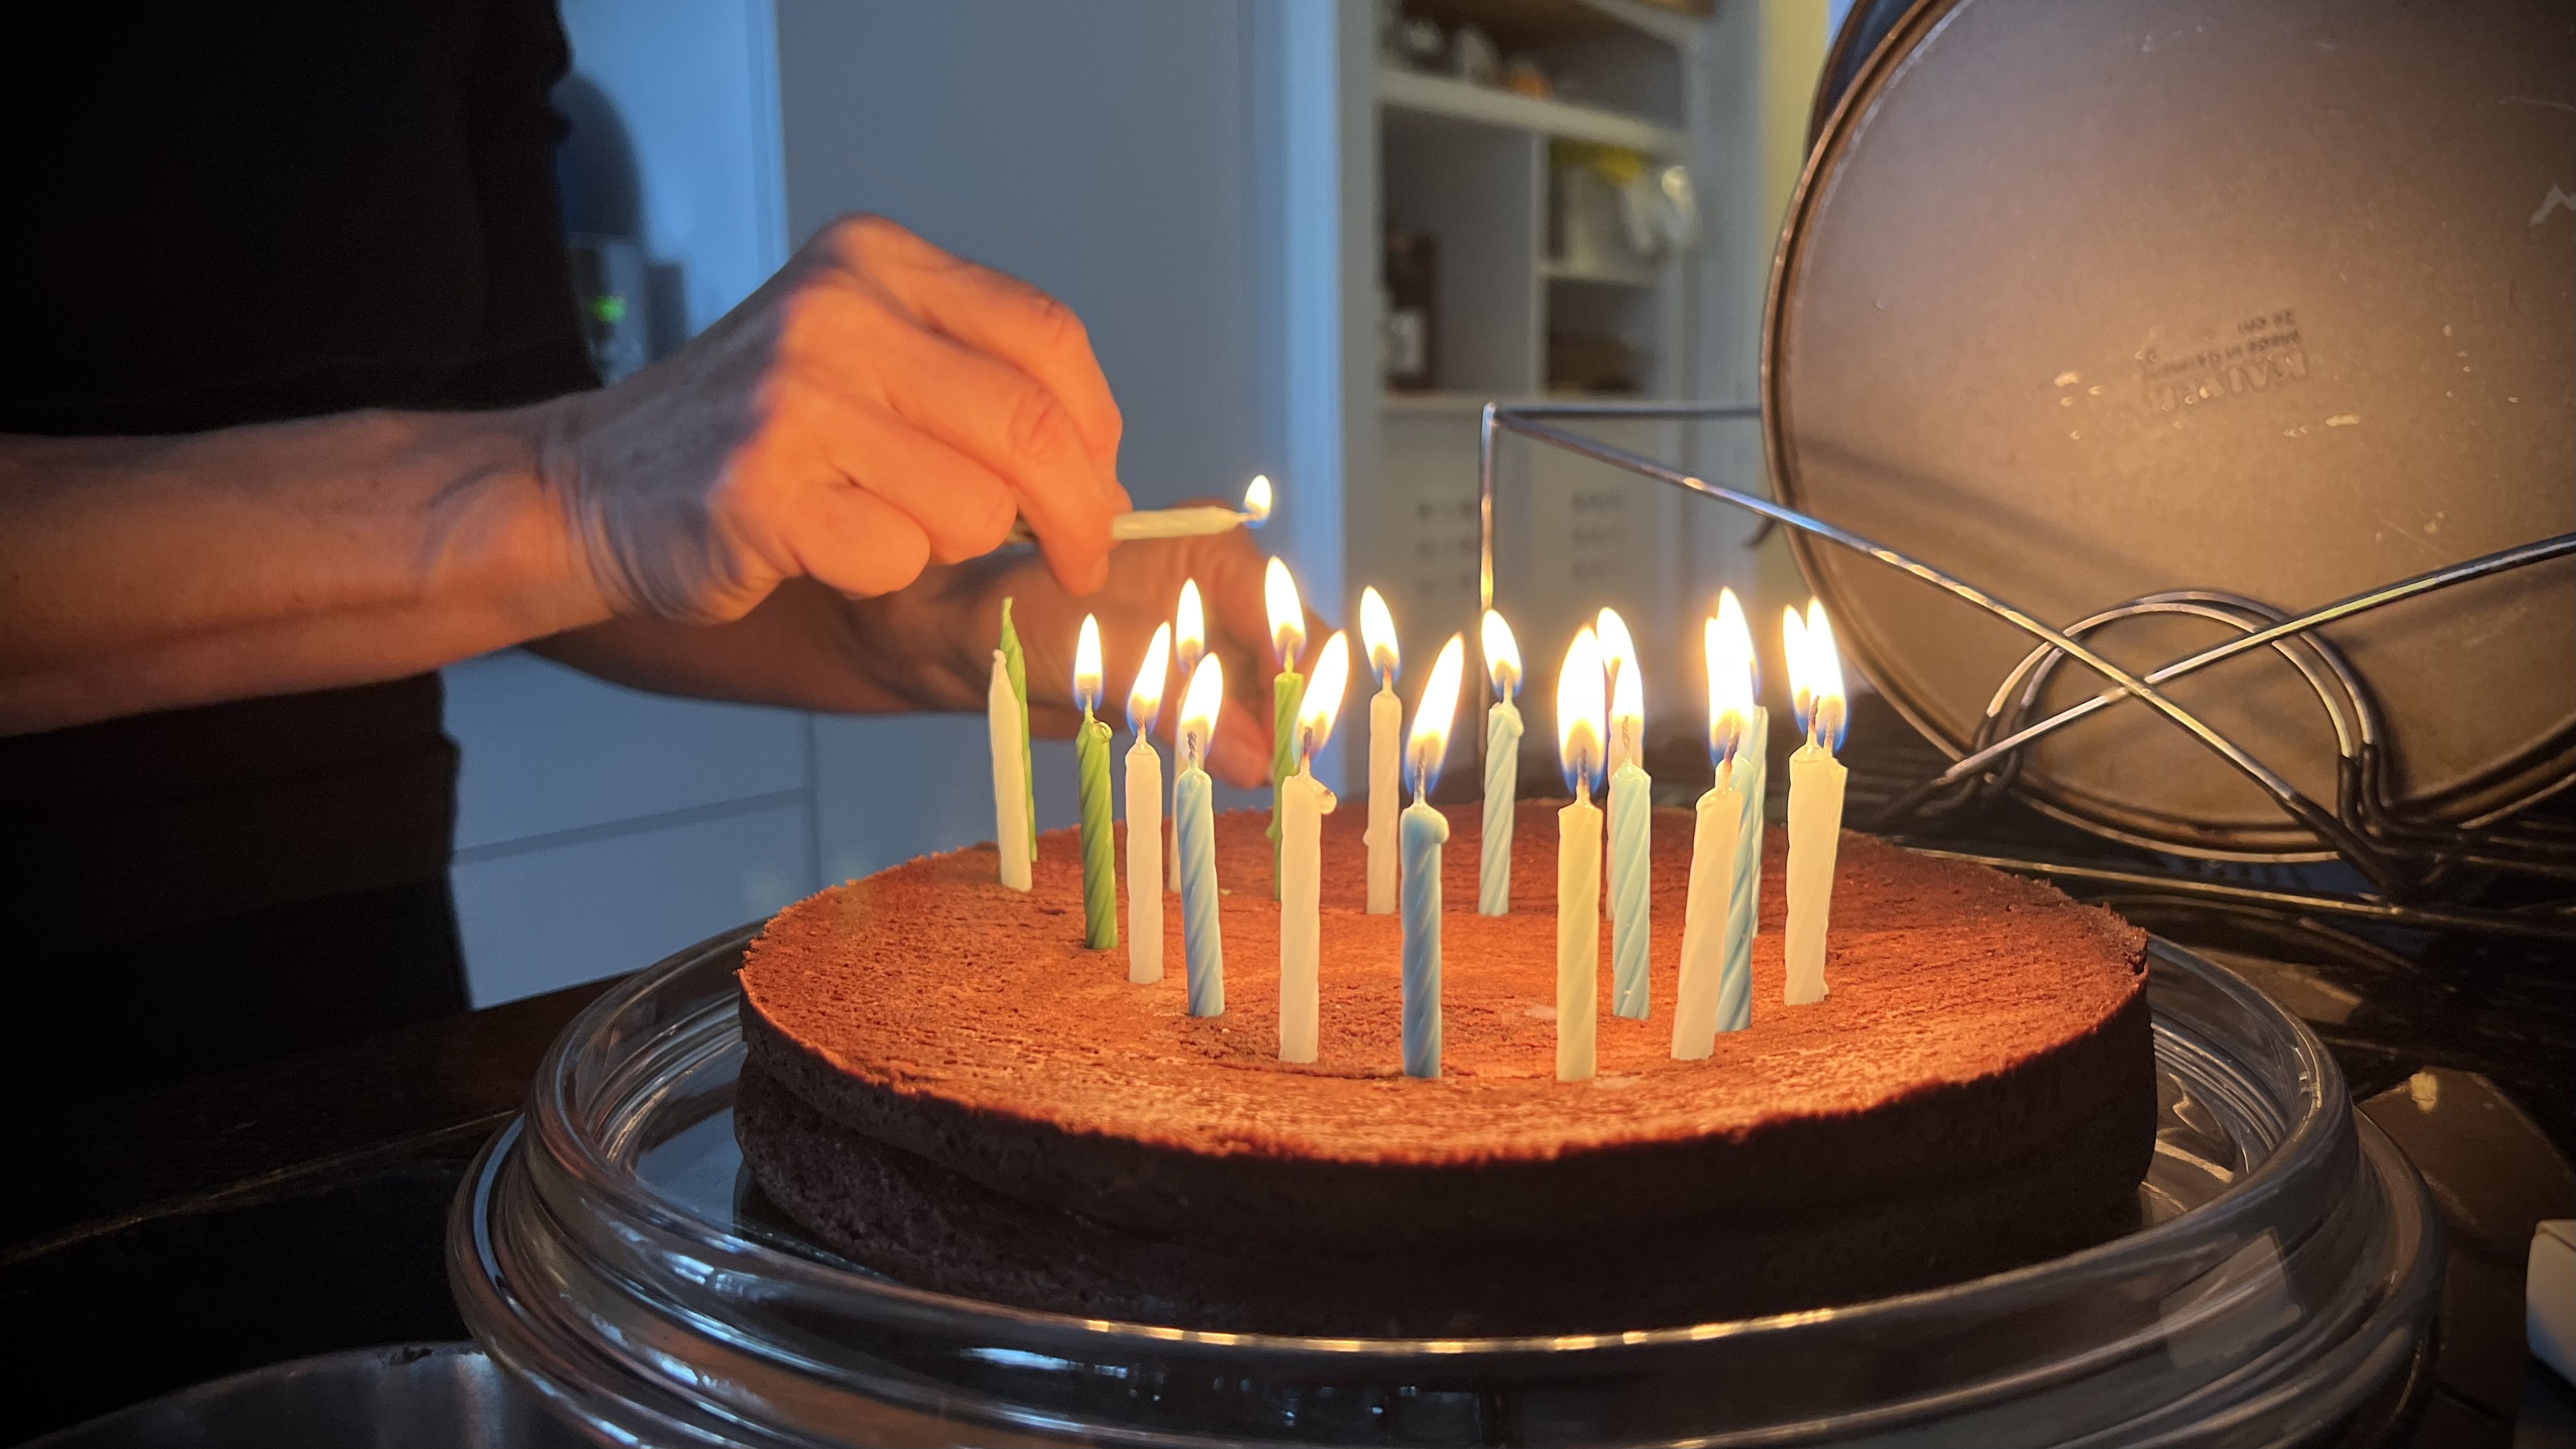 A chocolate cake with 21 coloured candles being lit by Fabienne